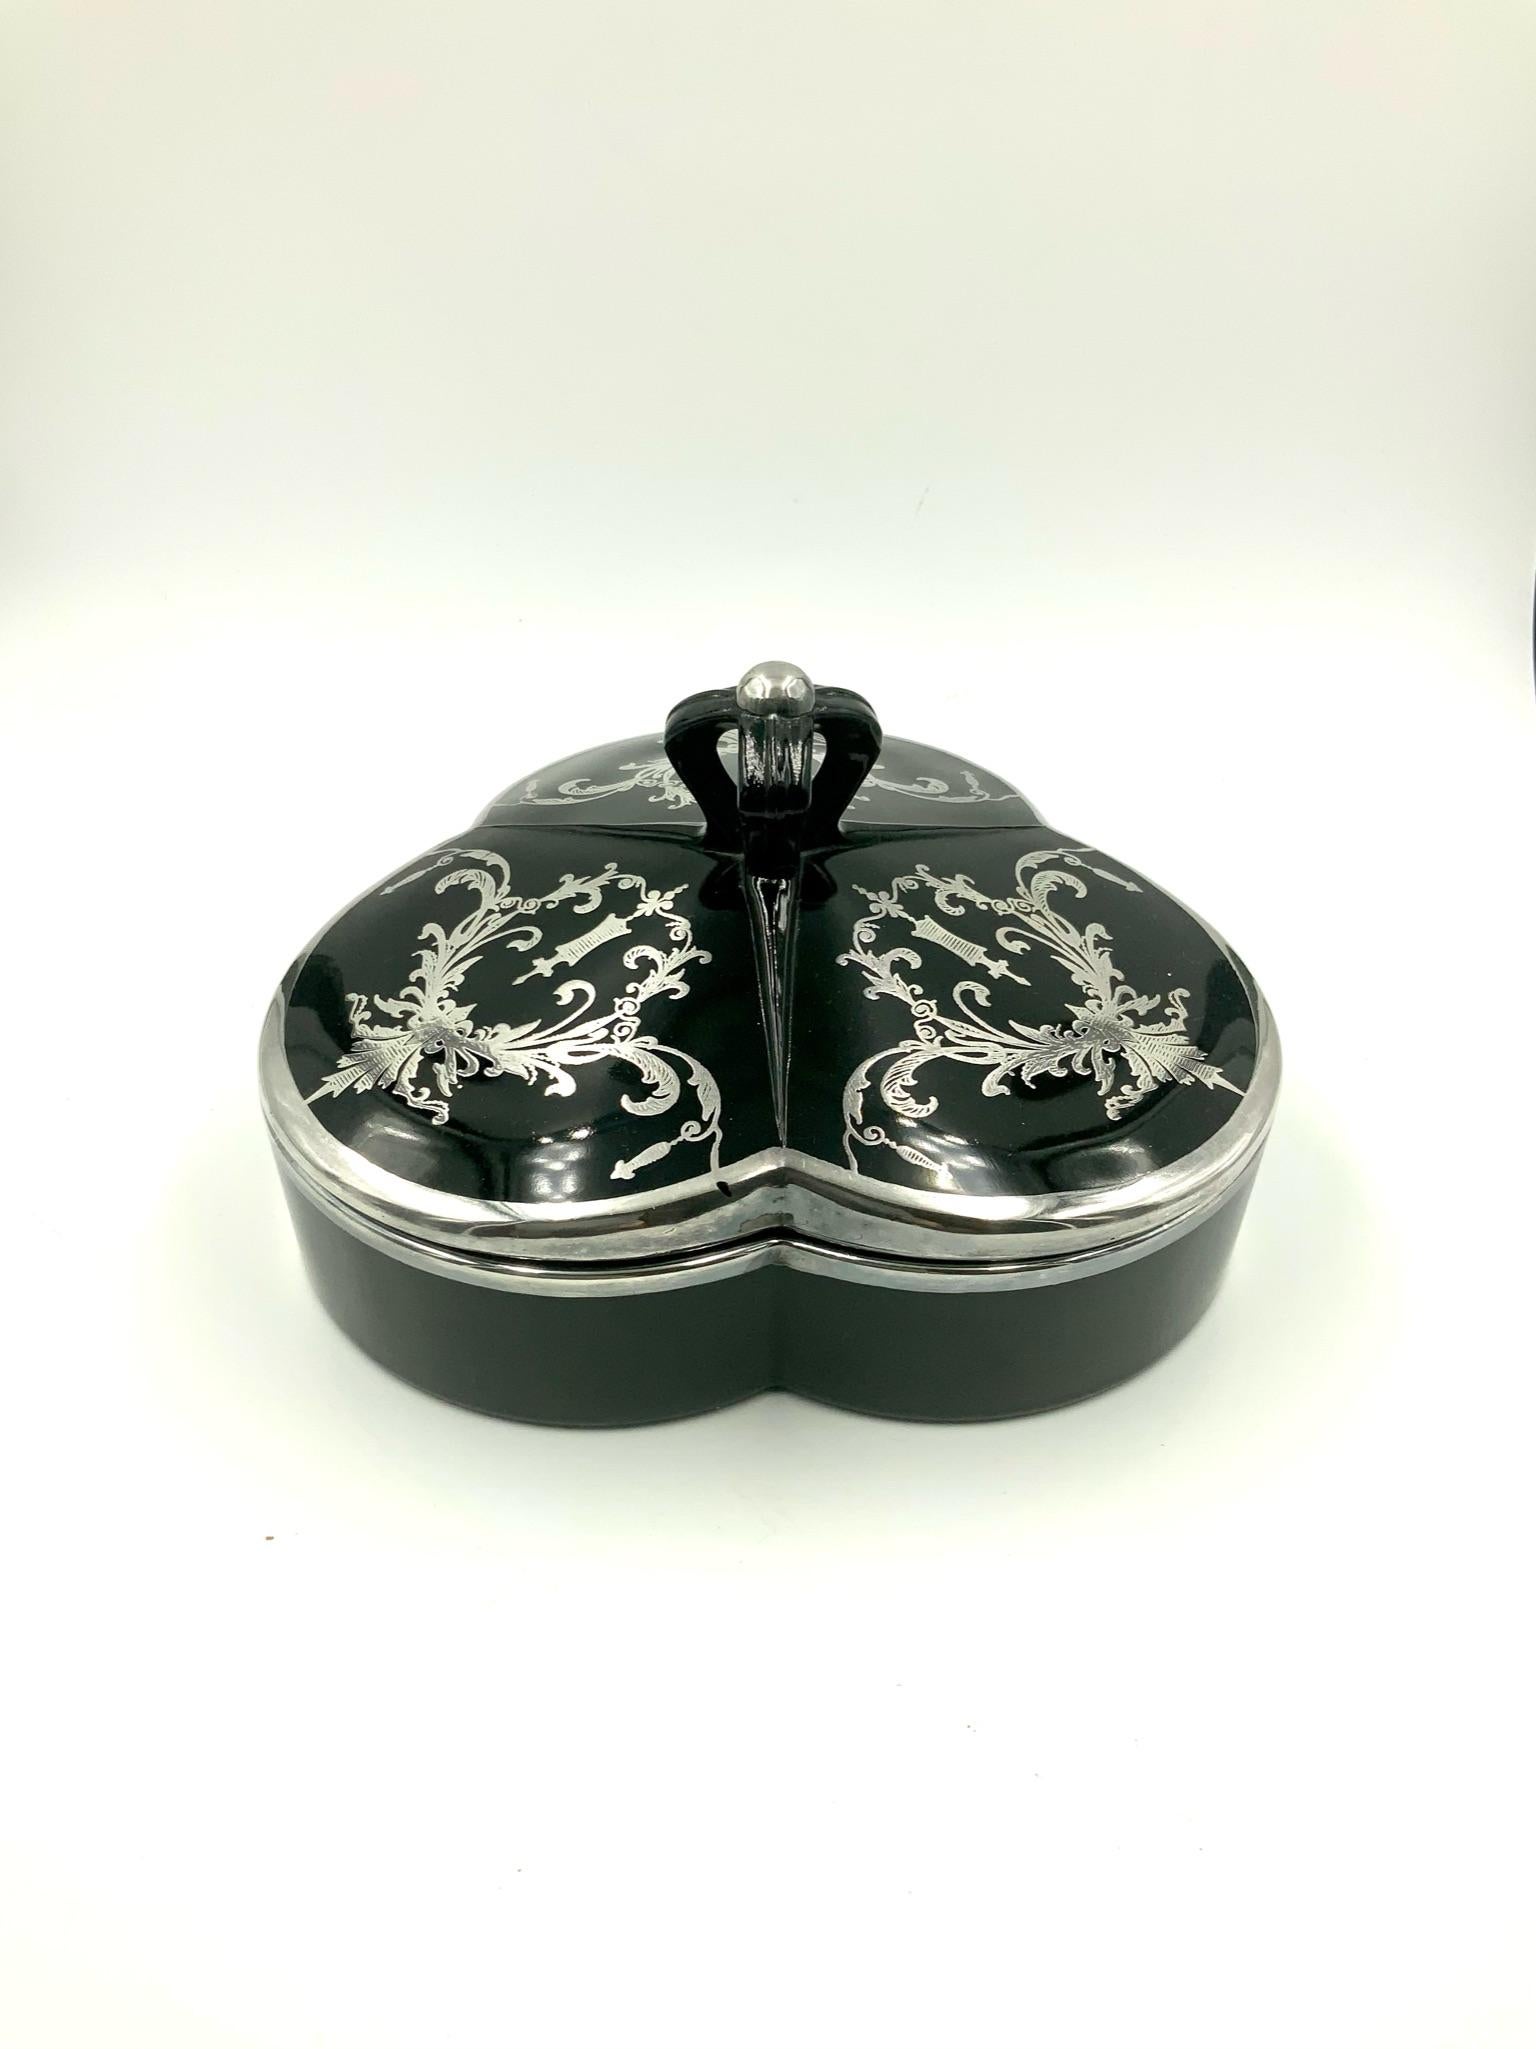 Simply elegant early 20th century silver overlay black glass covered divided candy dish / jar / box featuring three sections with a foliate, cartouches and scroll silver overlay design. The lid finial looks similar to a crown. There are silver rims